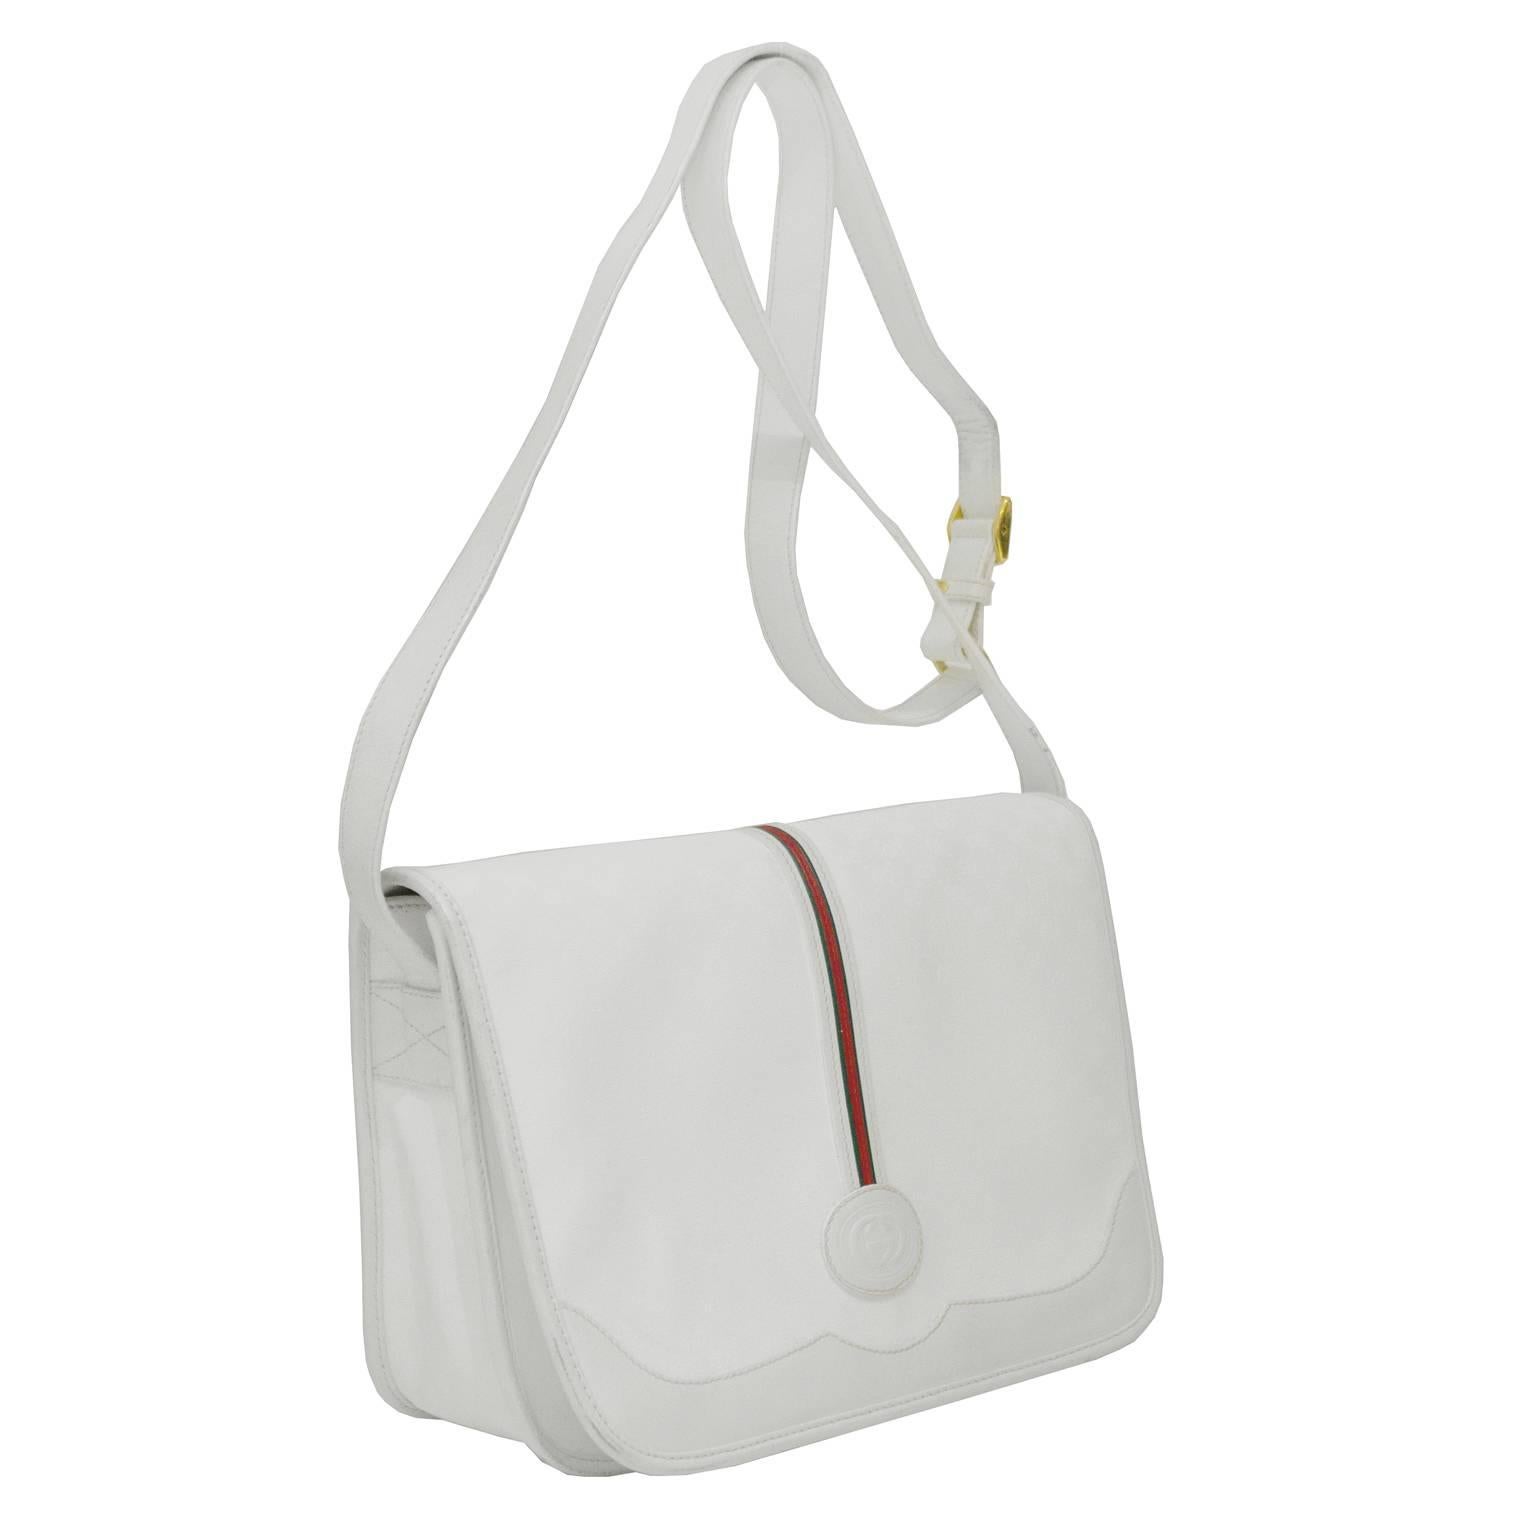 1970's Gucci white coated canvas and leather messenger bag with a long adjustable cross body strap. Constructed of grey on white signature monogram canvas trimmed in a smooth white leather. Large flap is decorated with a vertical red and green